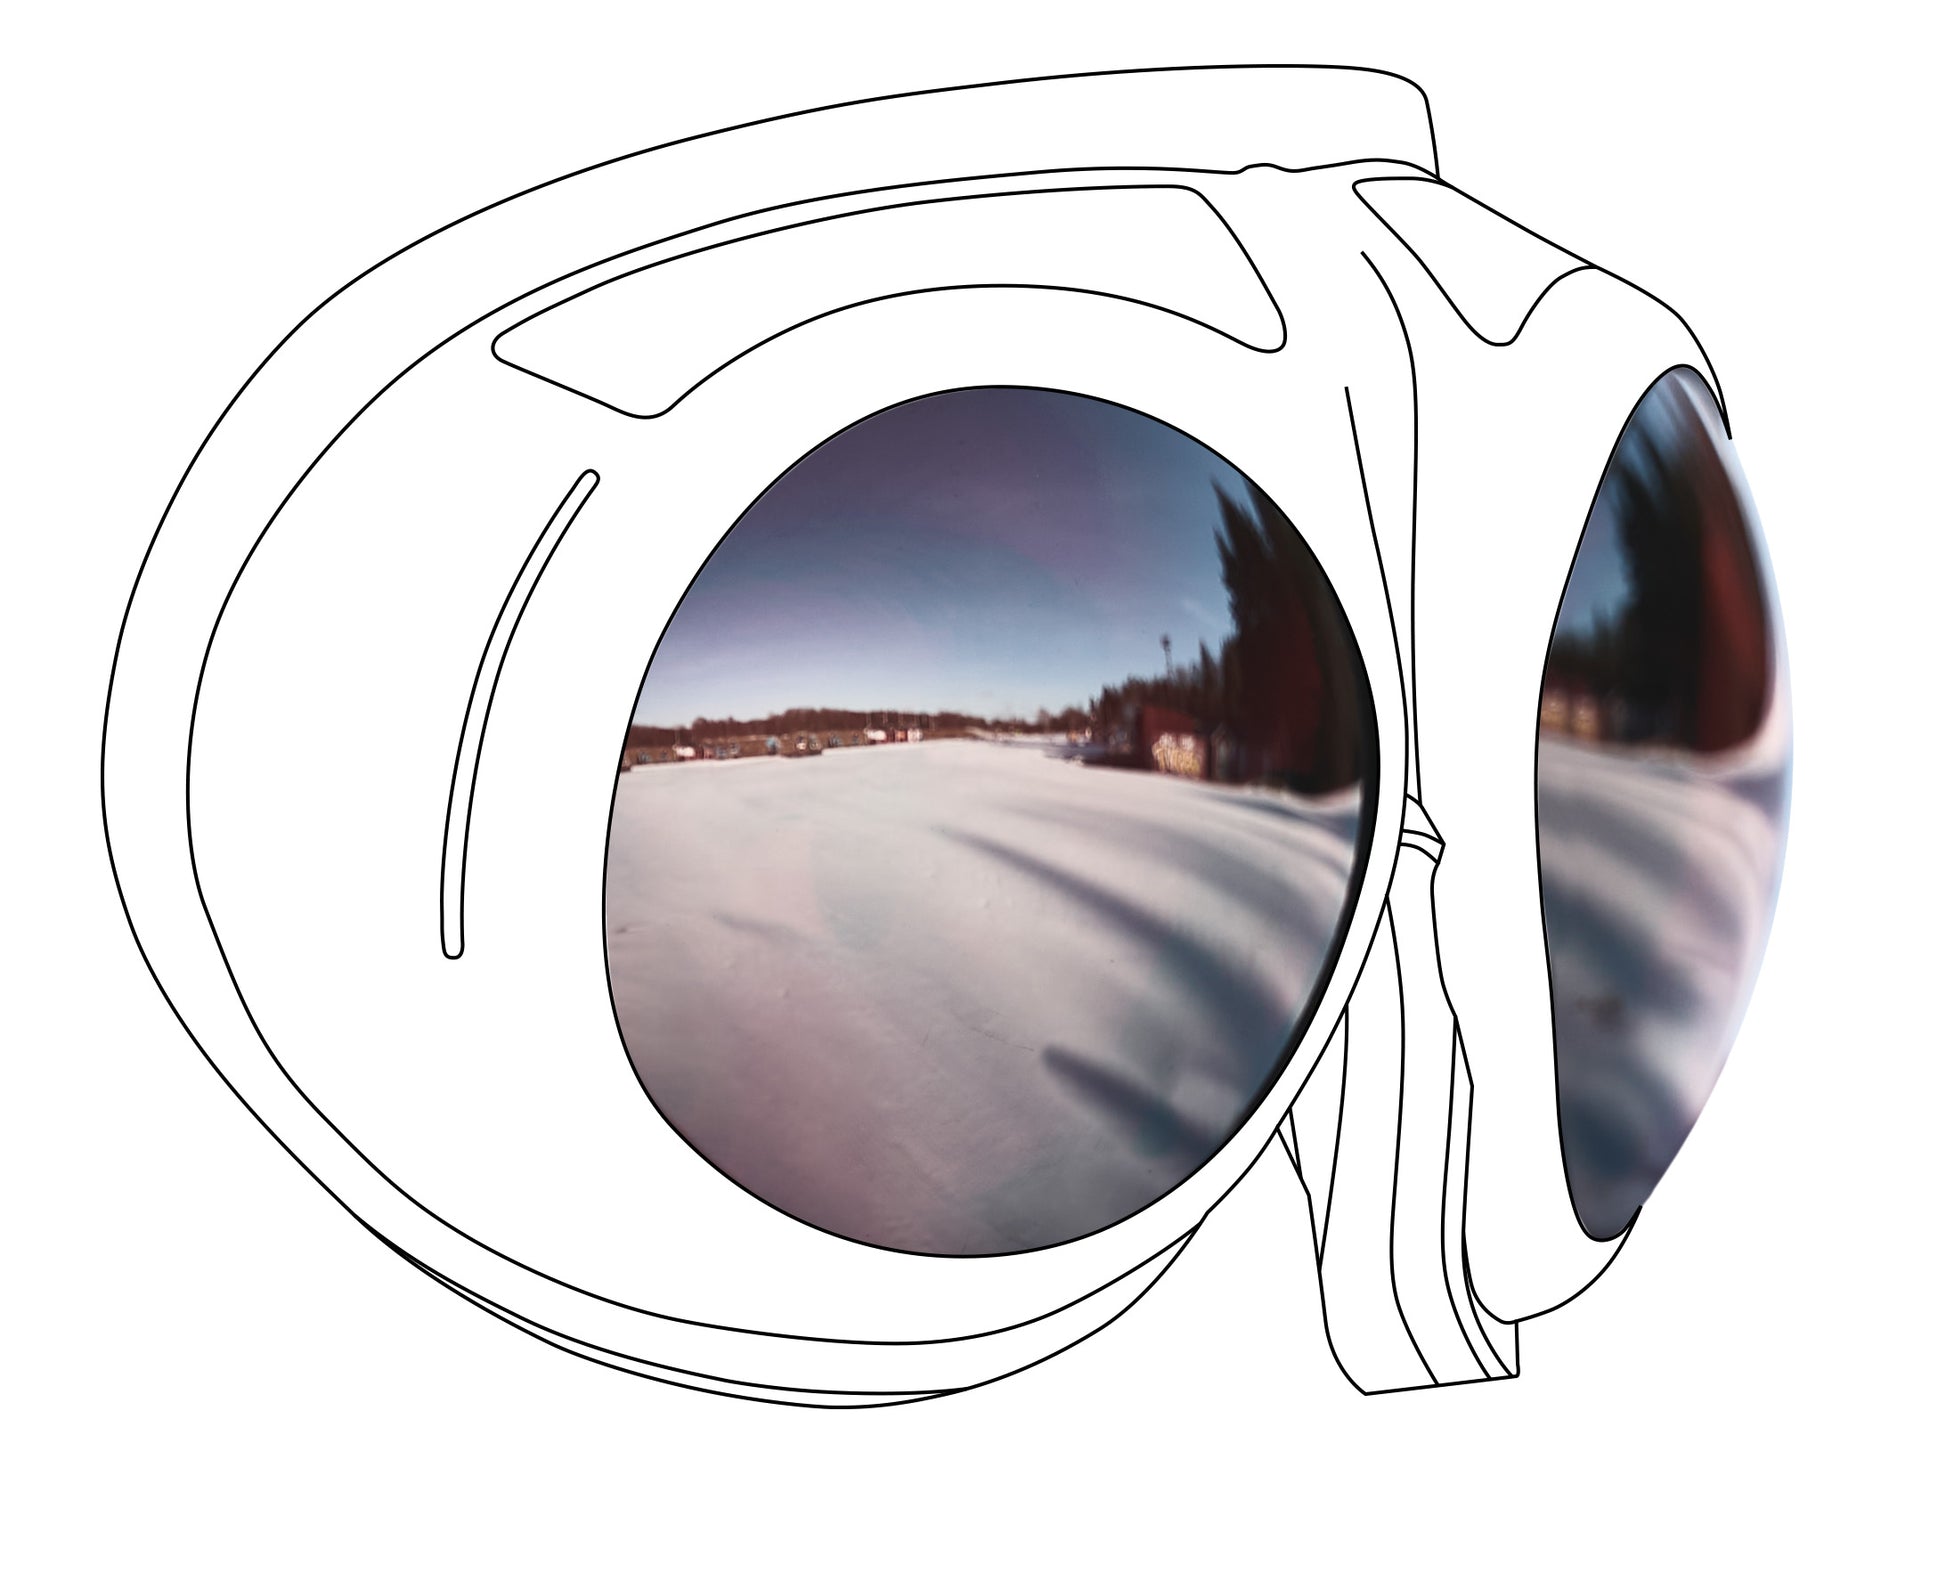 Zeiss orange high contrast lenses with silver mirror for Fluga goggles.